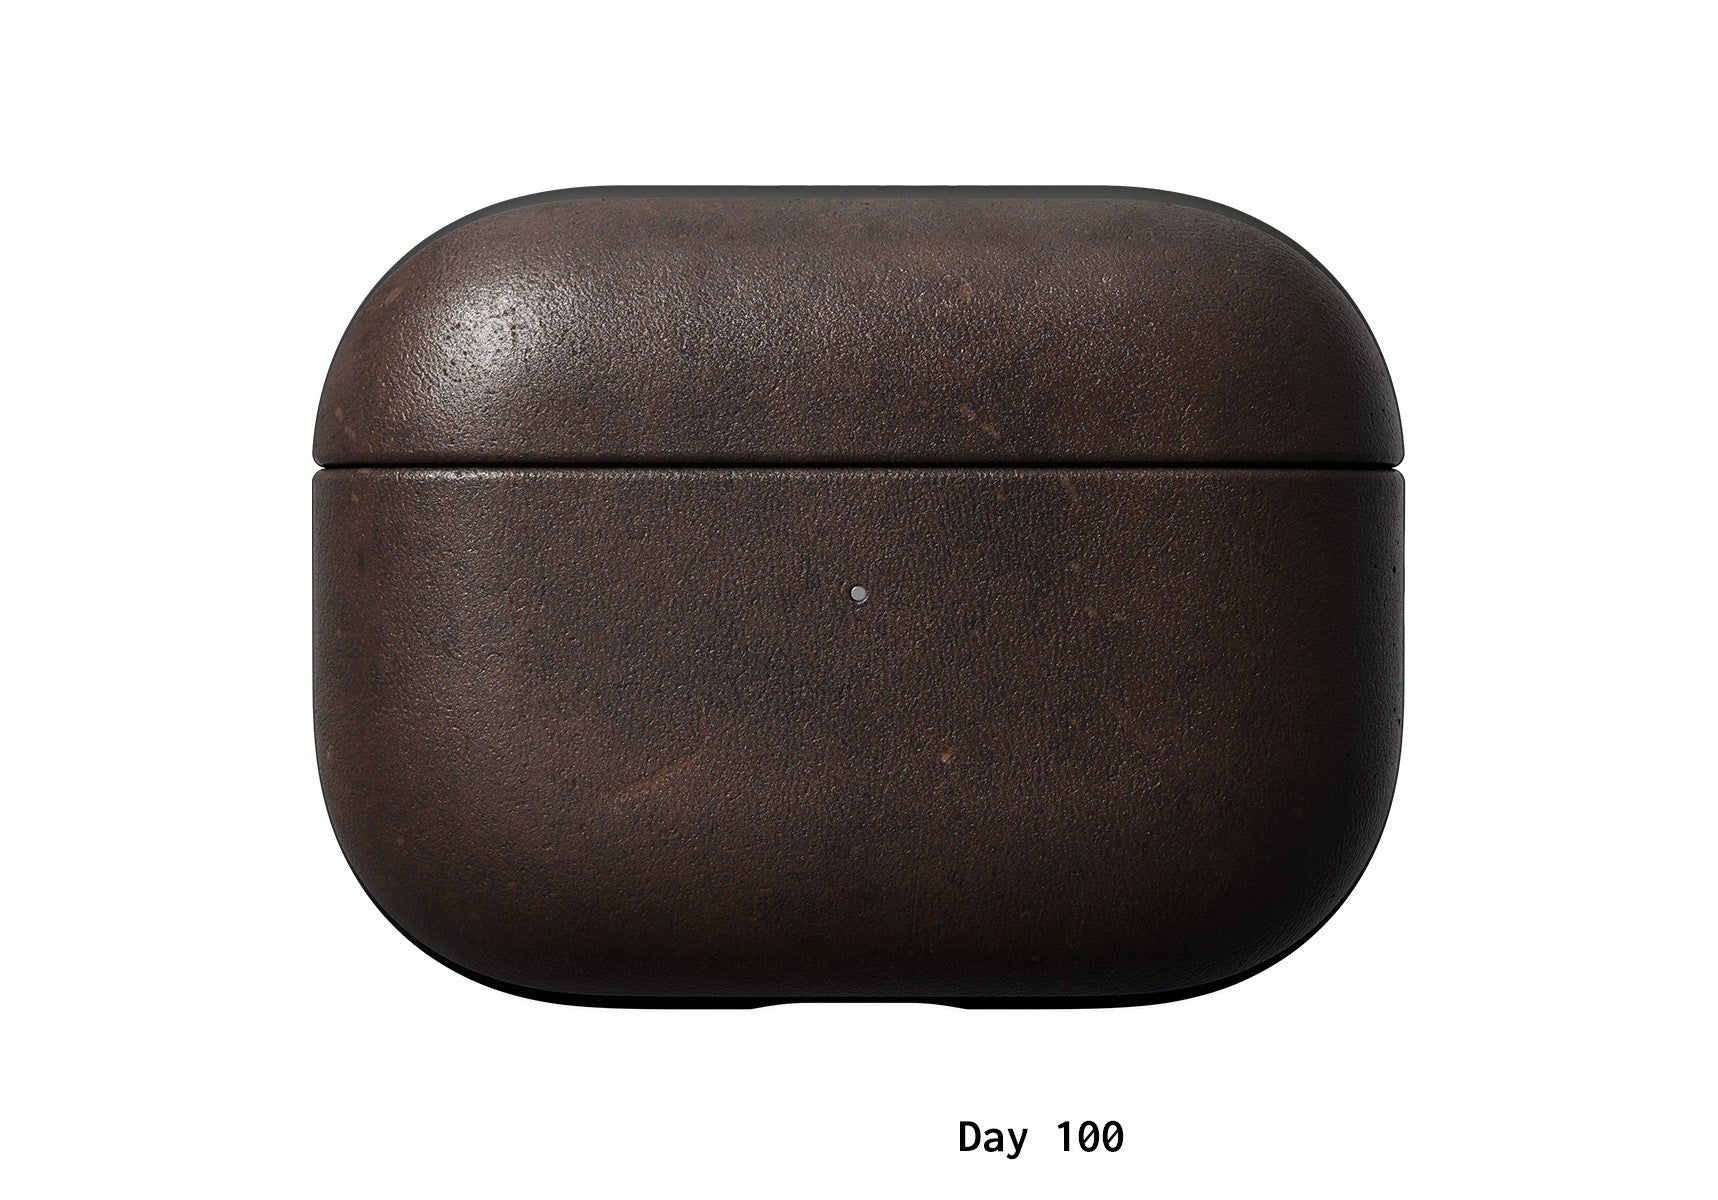 AirPods Rugged Case Horween δερμάτινη πατίνα μετά από εκατό ημέρες.